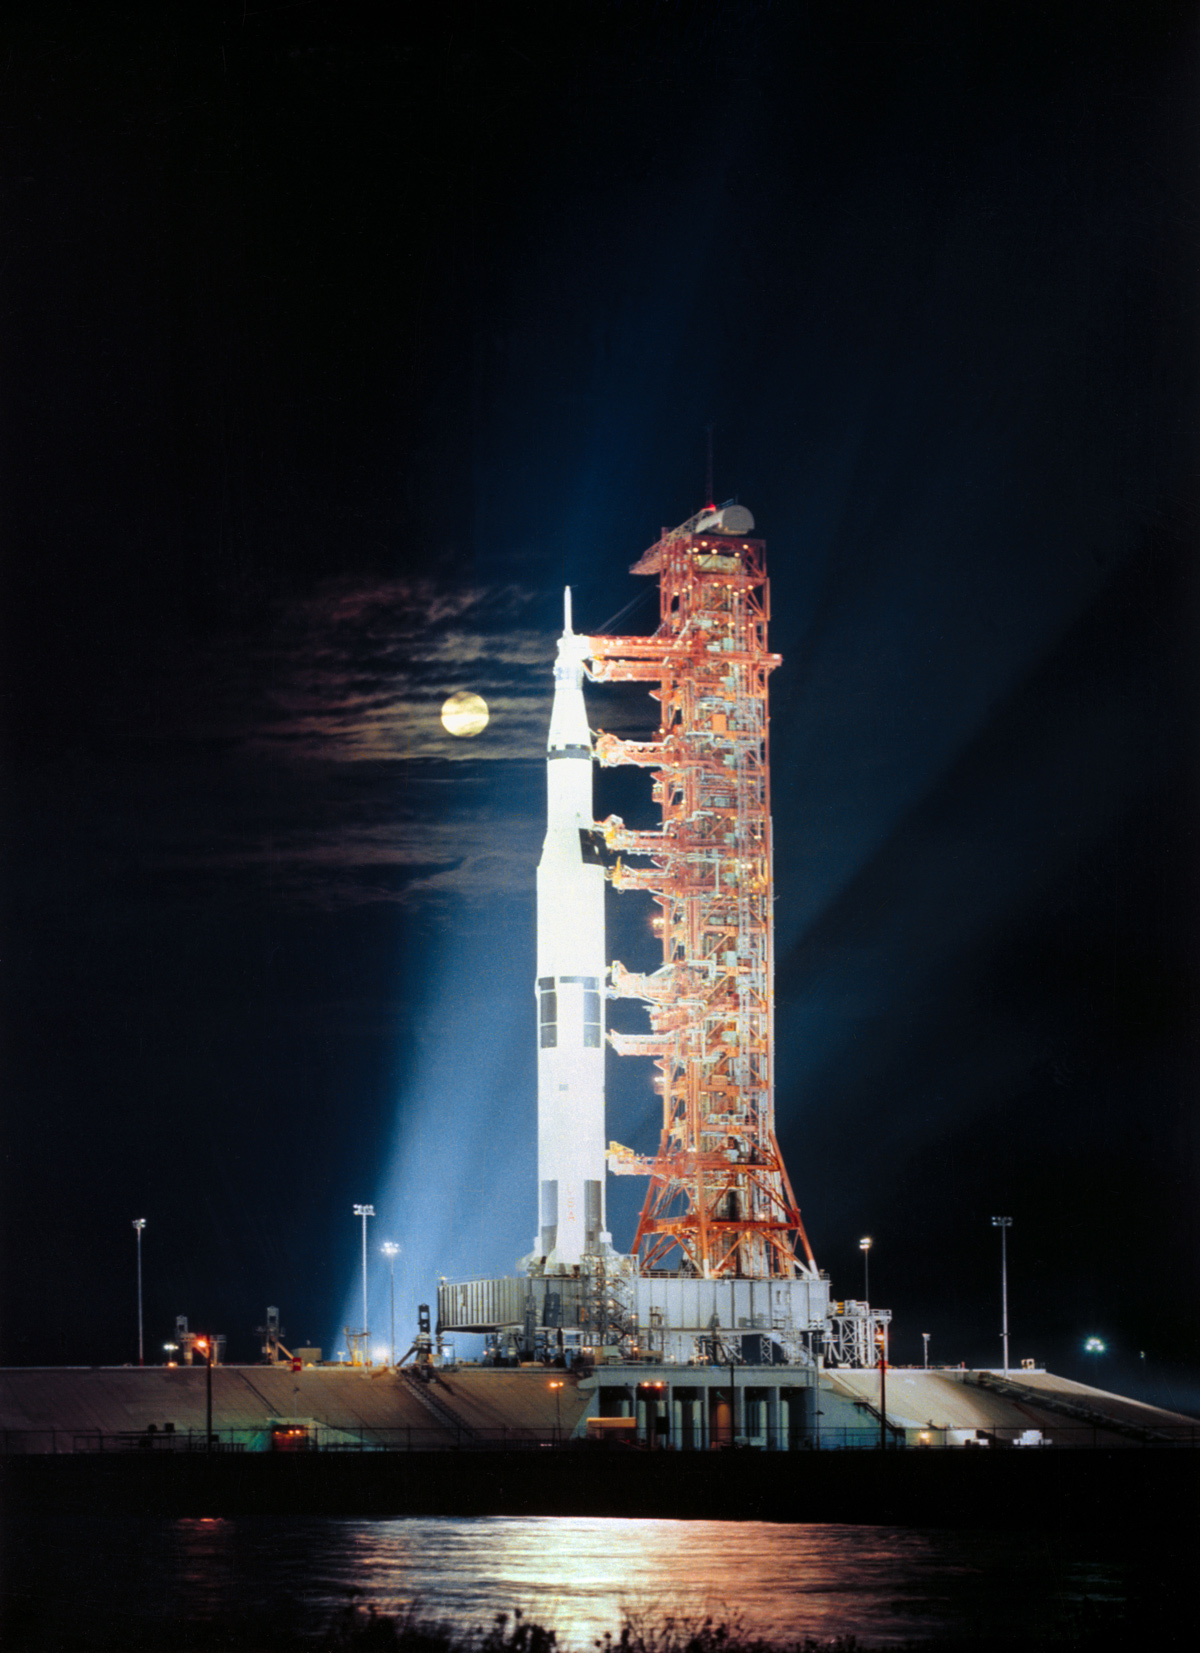 Spacecraft on launchpad with full moon in background